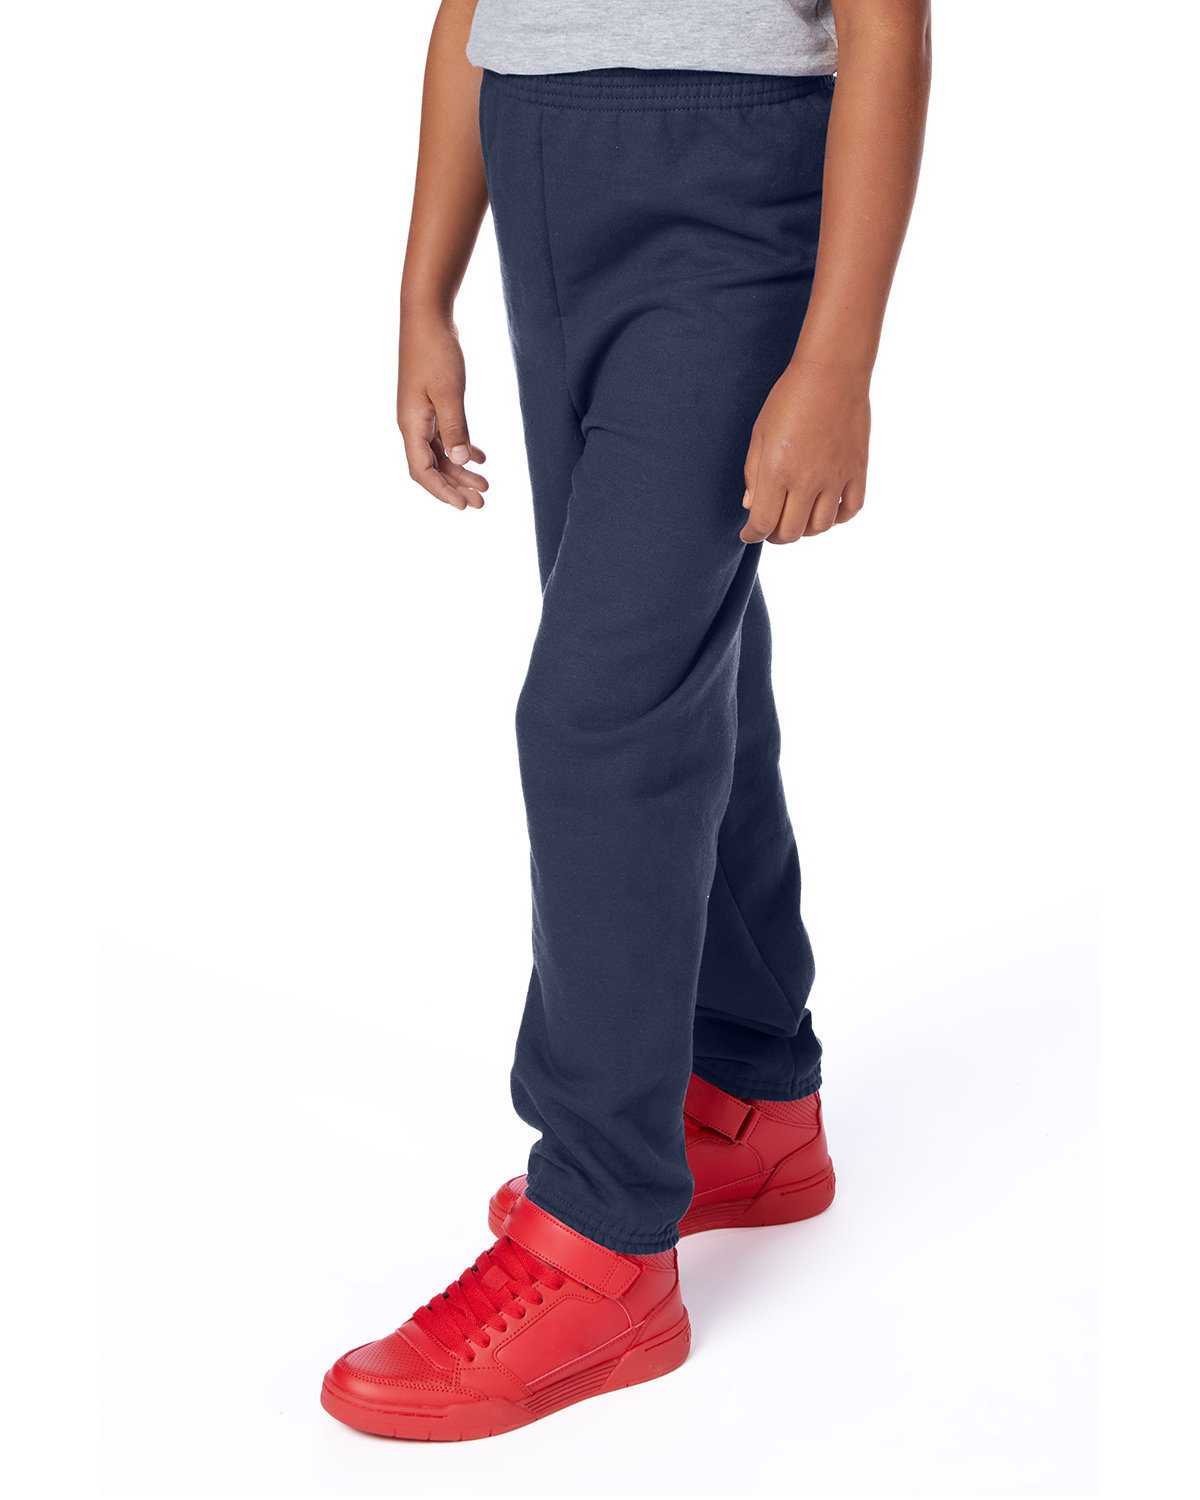 Hanes Youth Fleece Pant | alphabroder